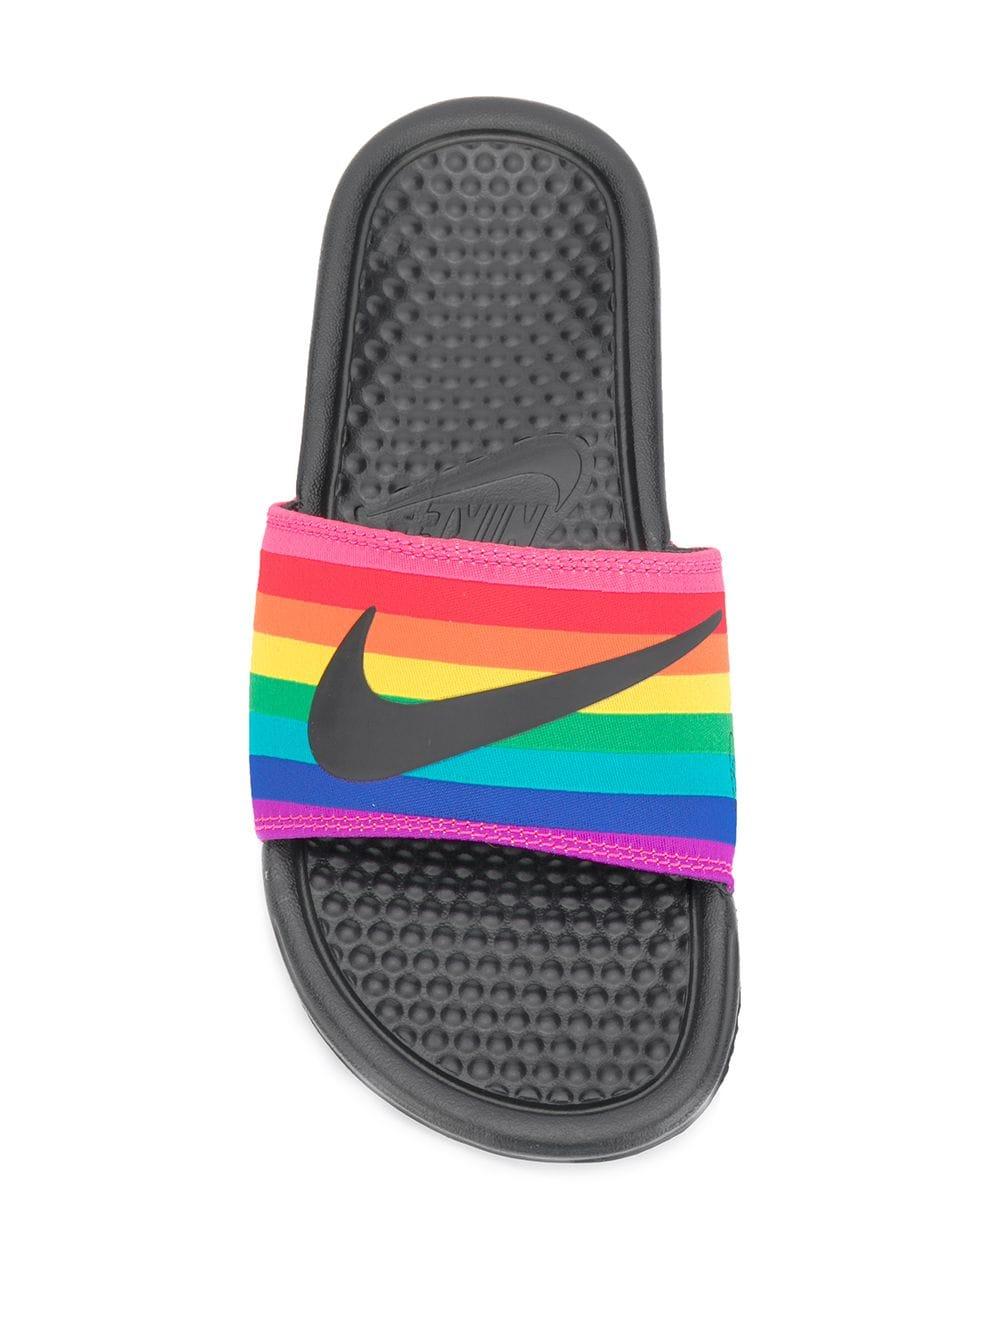 Nike Synthetic Rainbow Slides in Black - Lyst